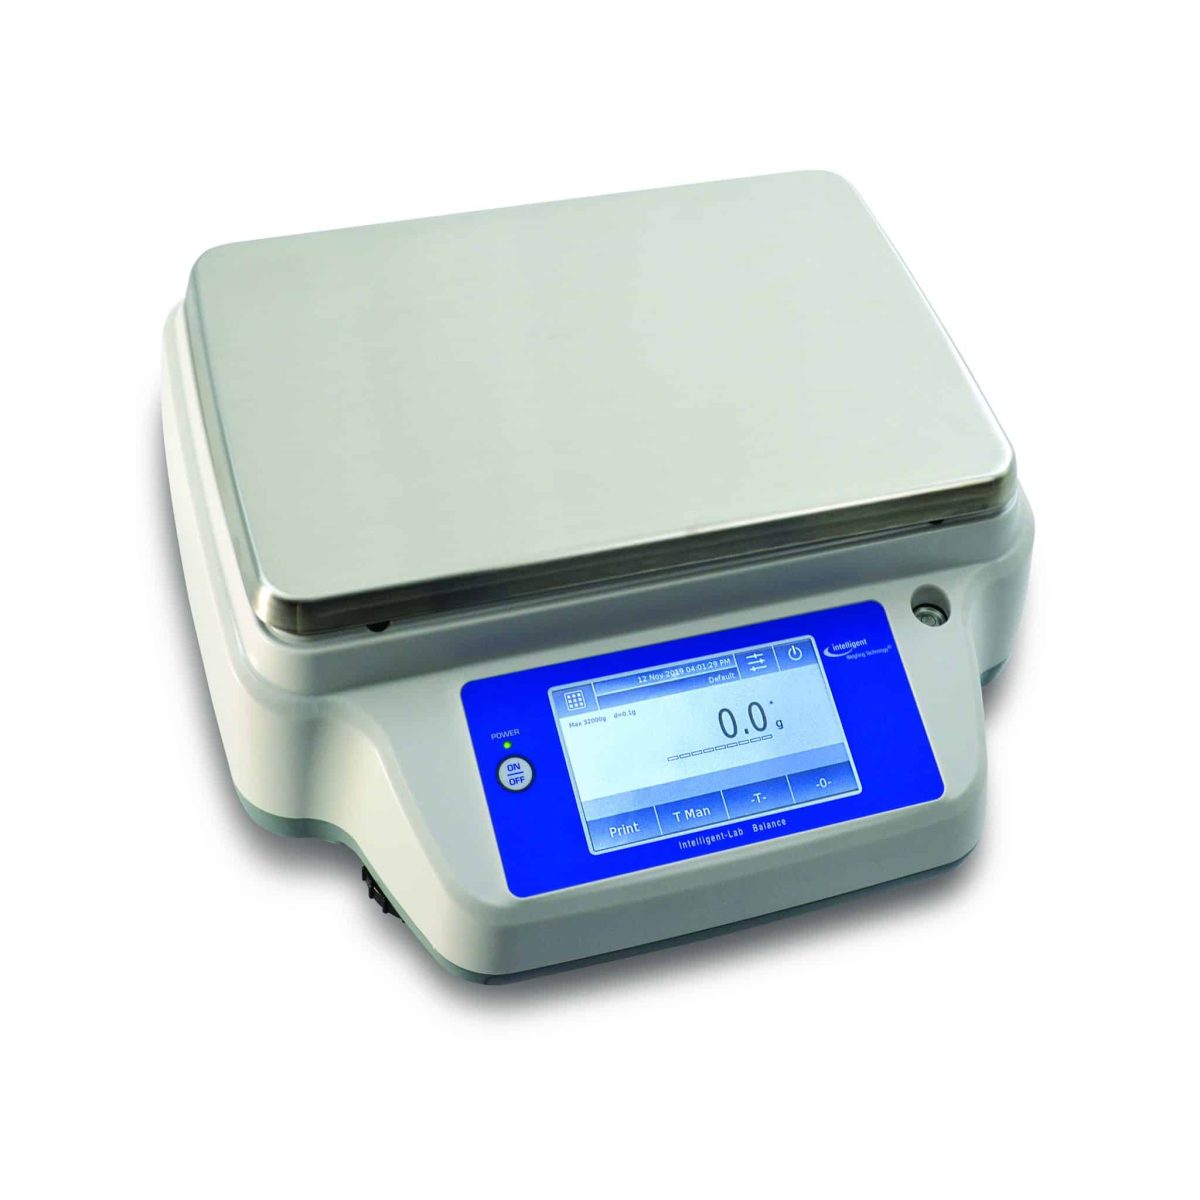 Intelligent Weighing PH Touch Series Precision Balances